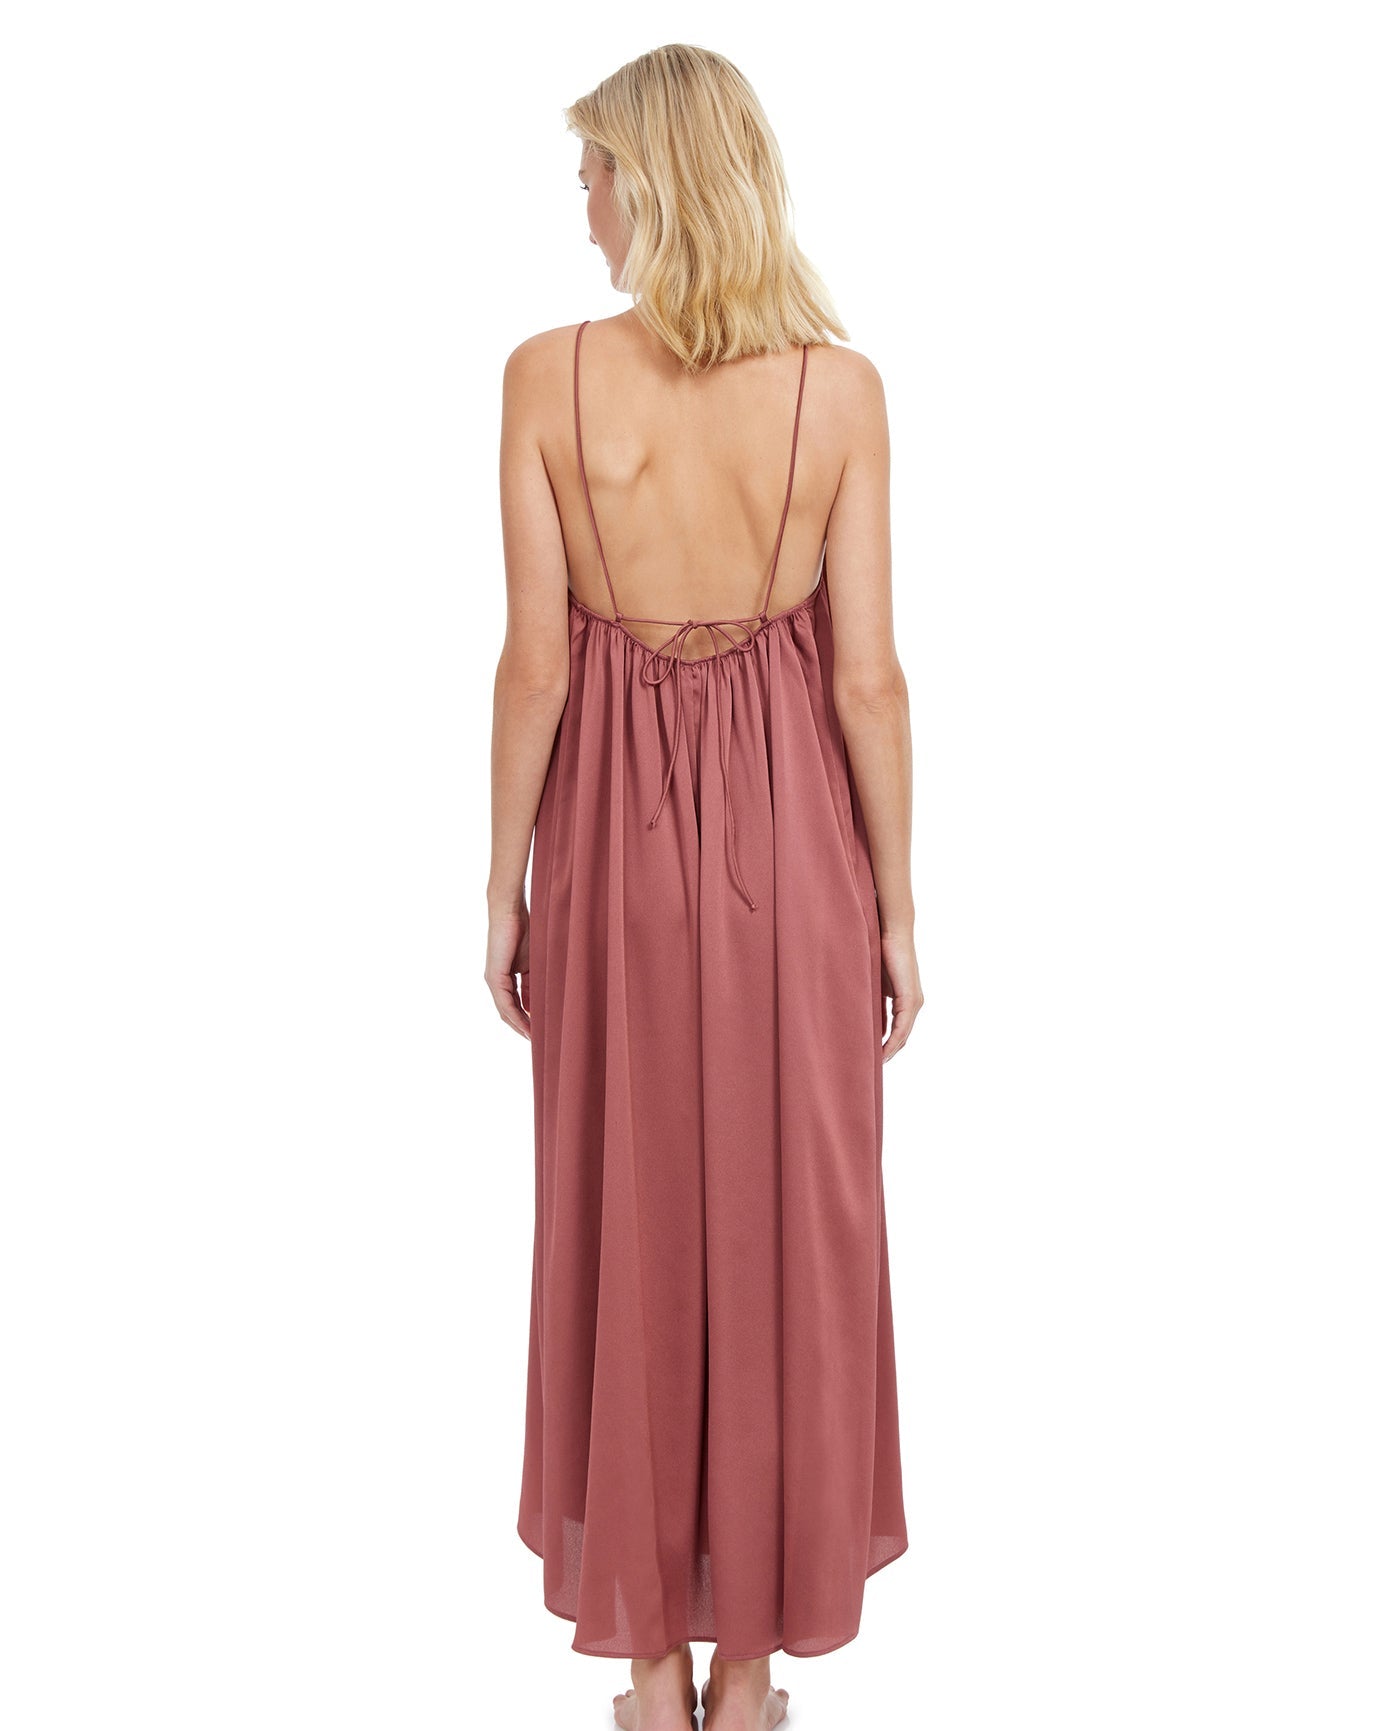 Back View Of Gottex Classic Queen Of Paradise High Neck Long Cover Up Dress | Gottex Queen Of Paradise Rose Taupe